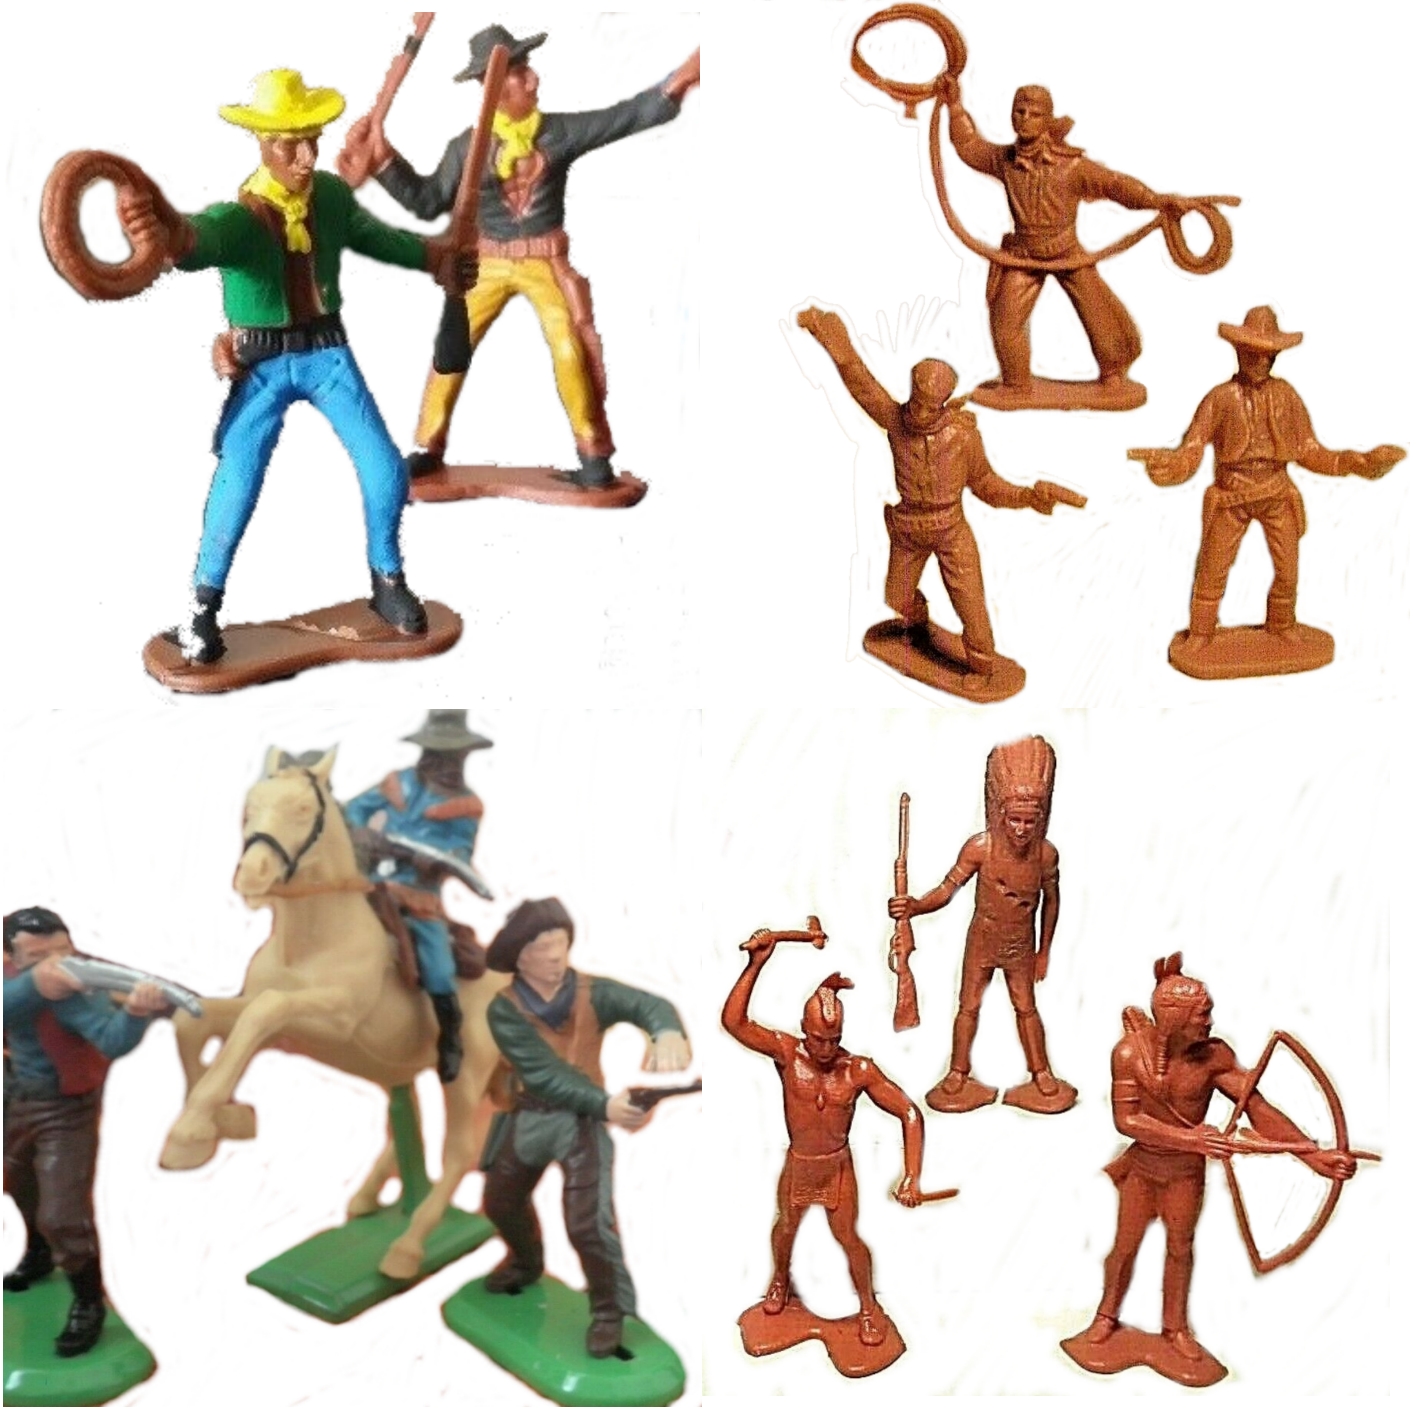 Western toy soldiers